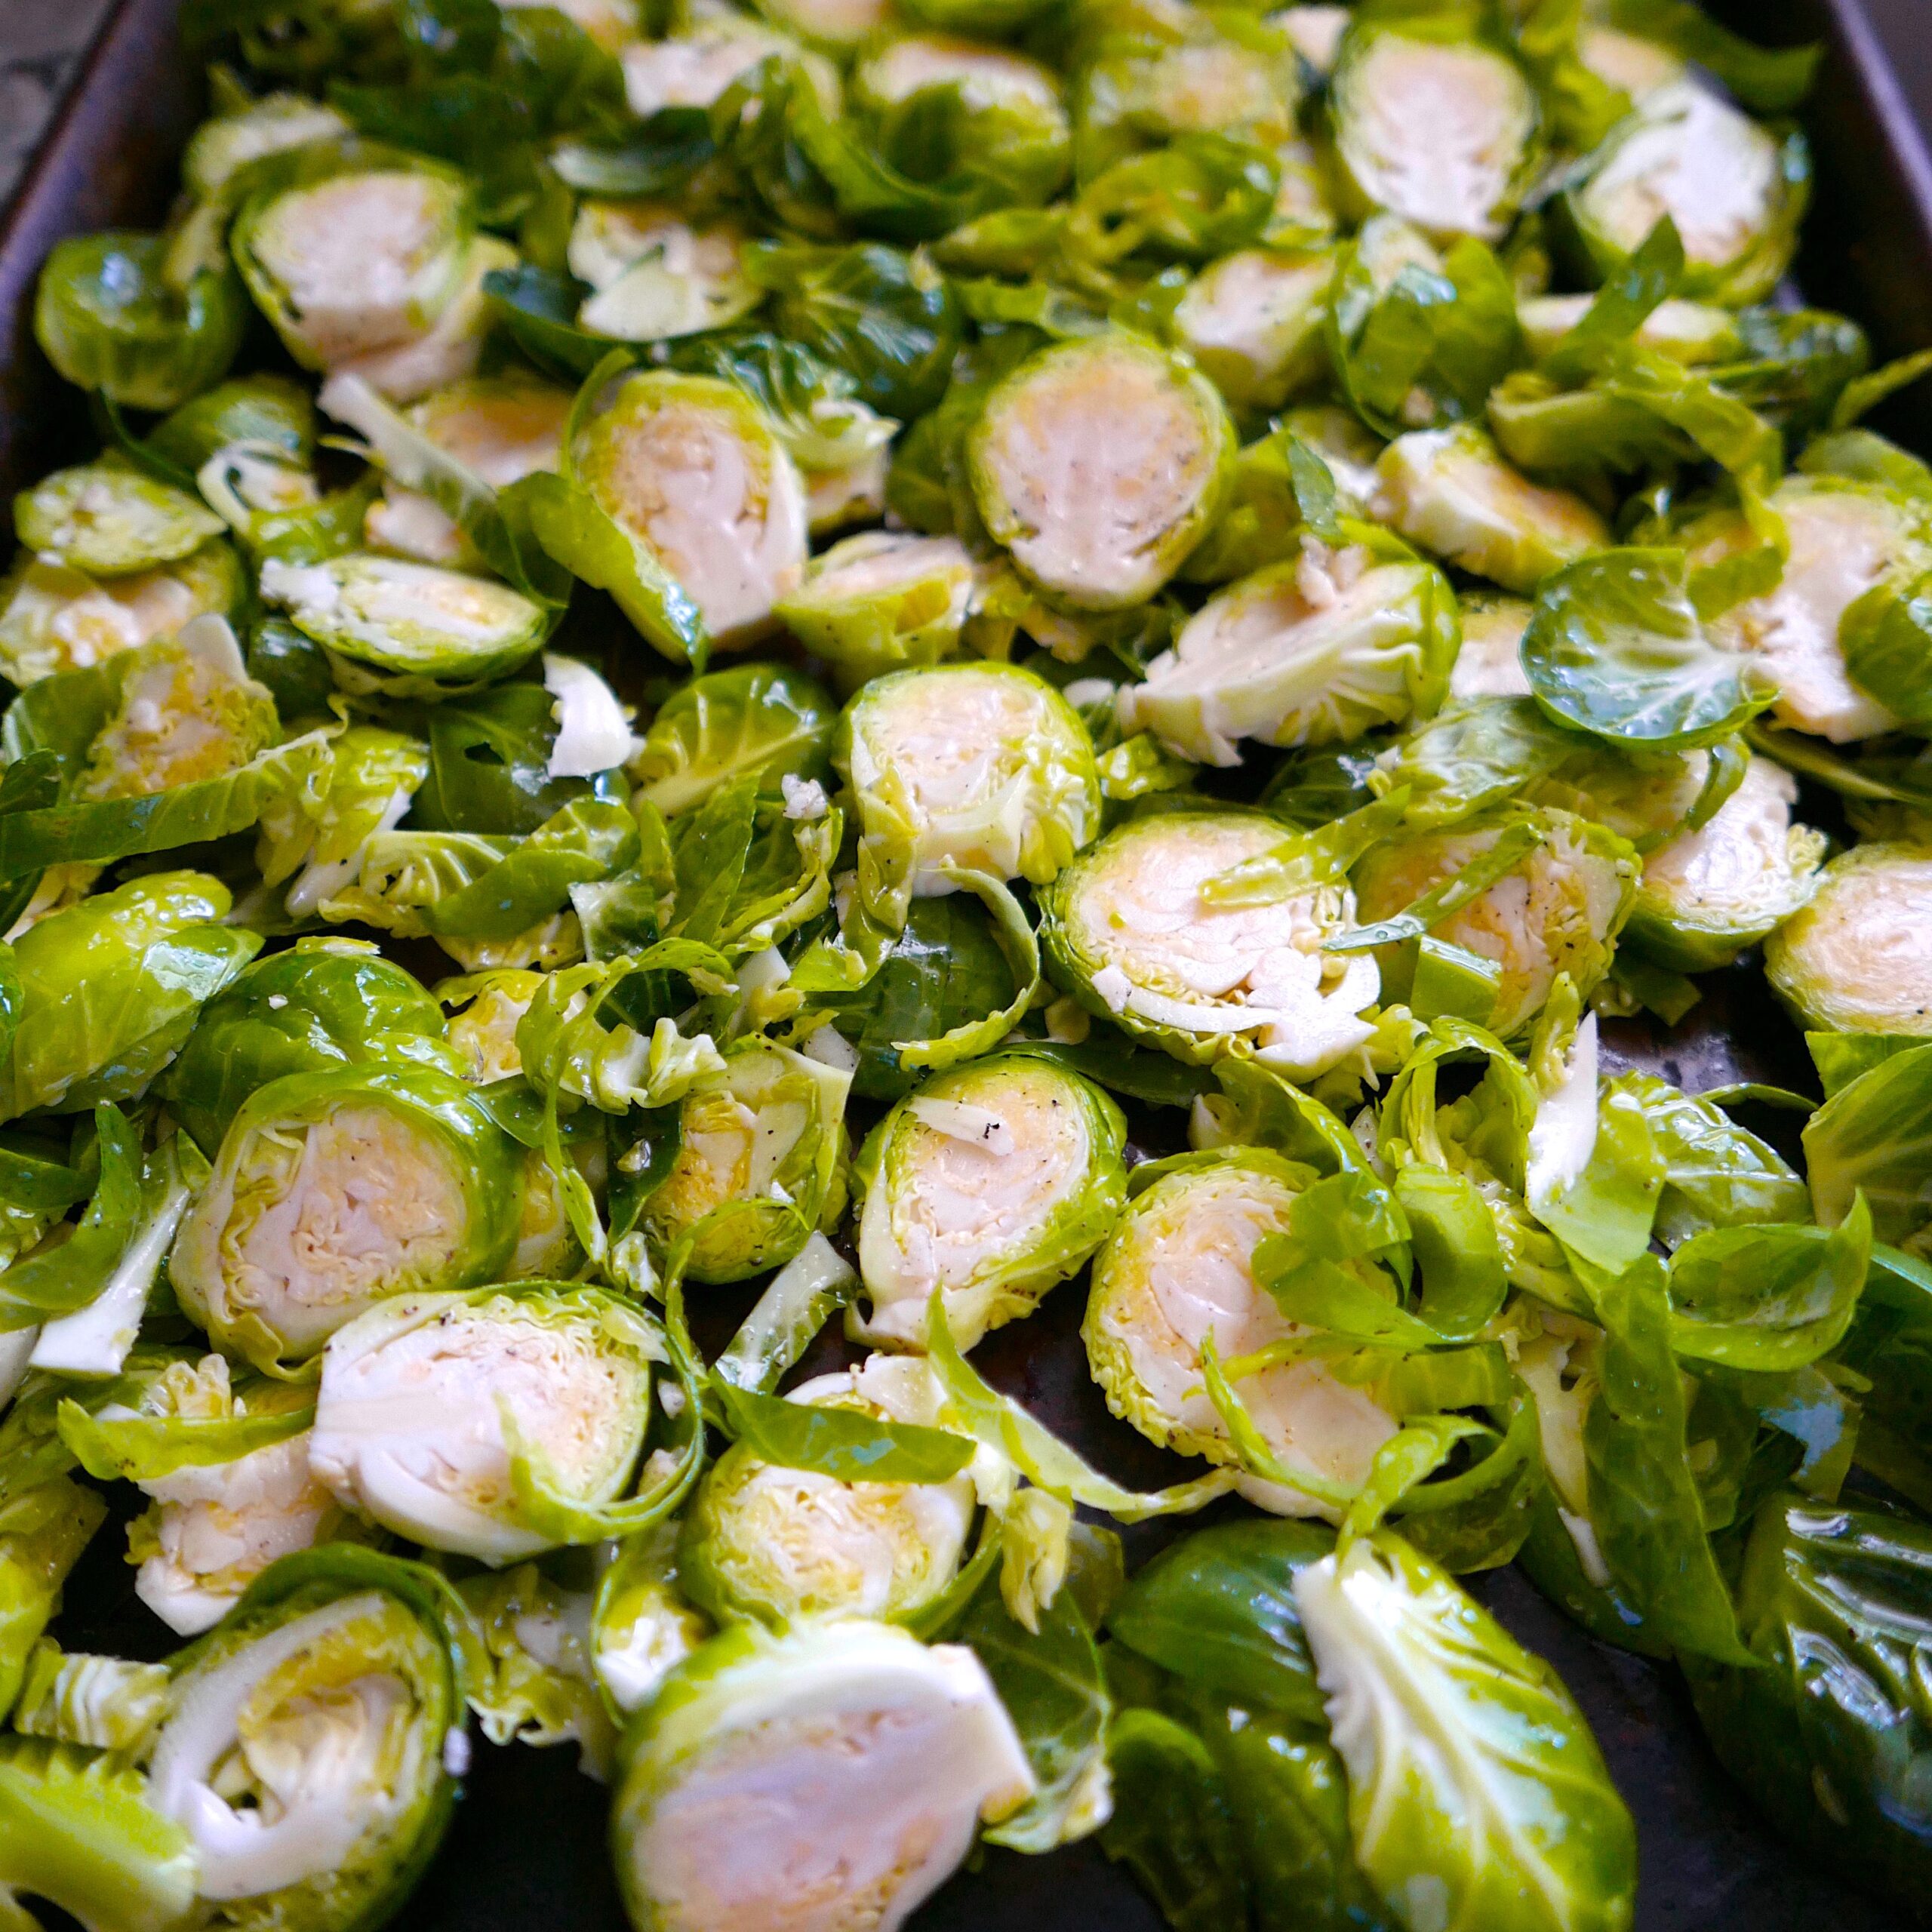 vegan brussels sprouts spread out on a baking sheet